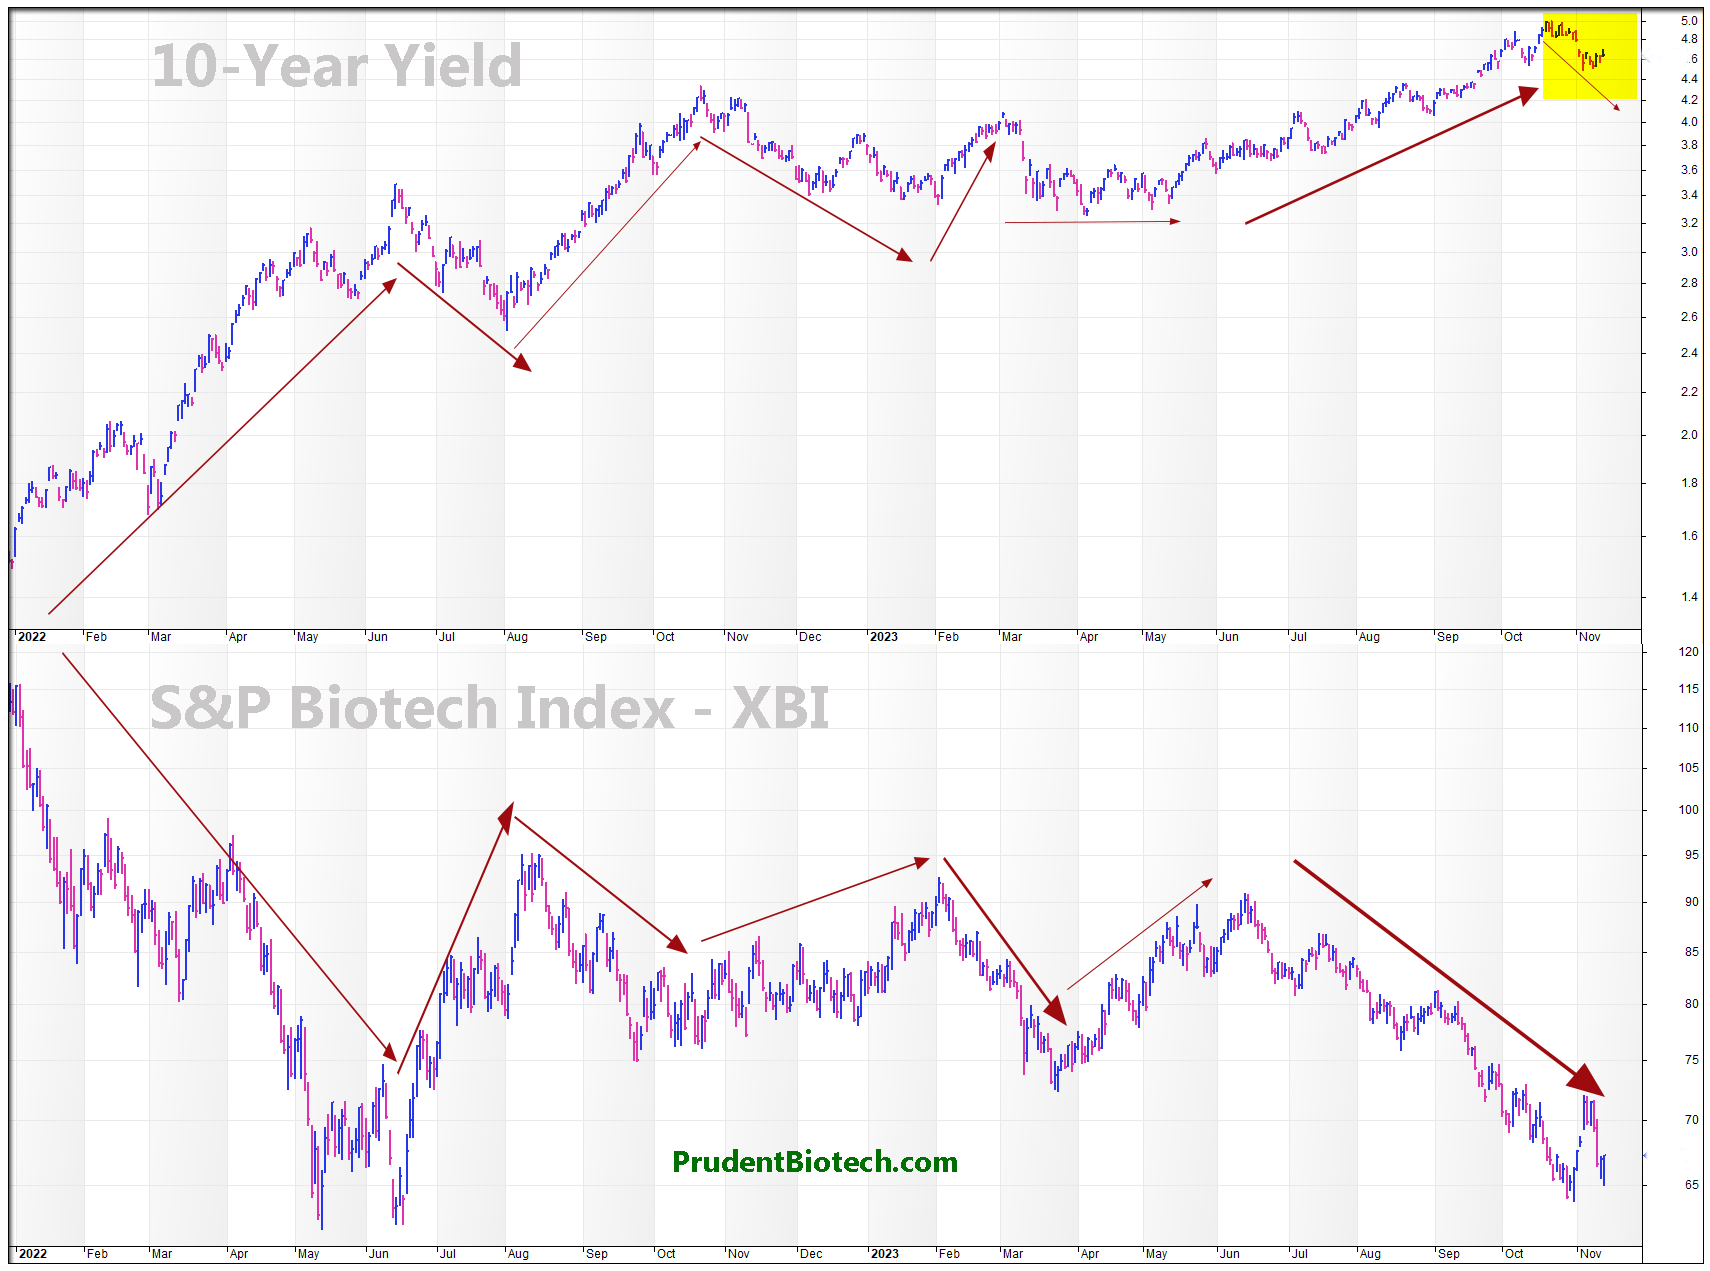 10-Year Yield and S&P Biotechnology Index (XBI)